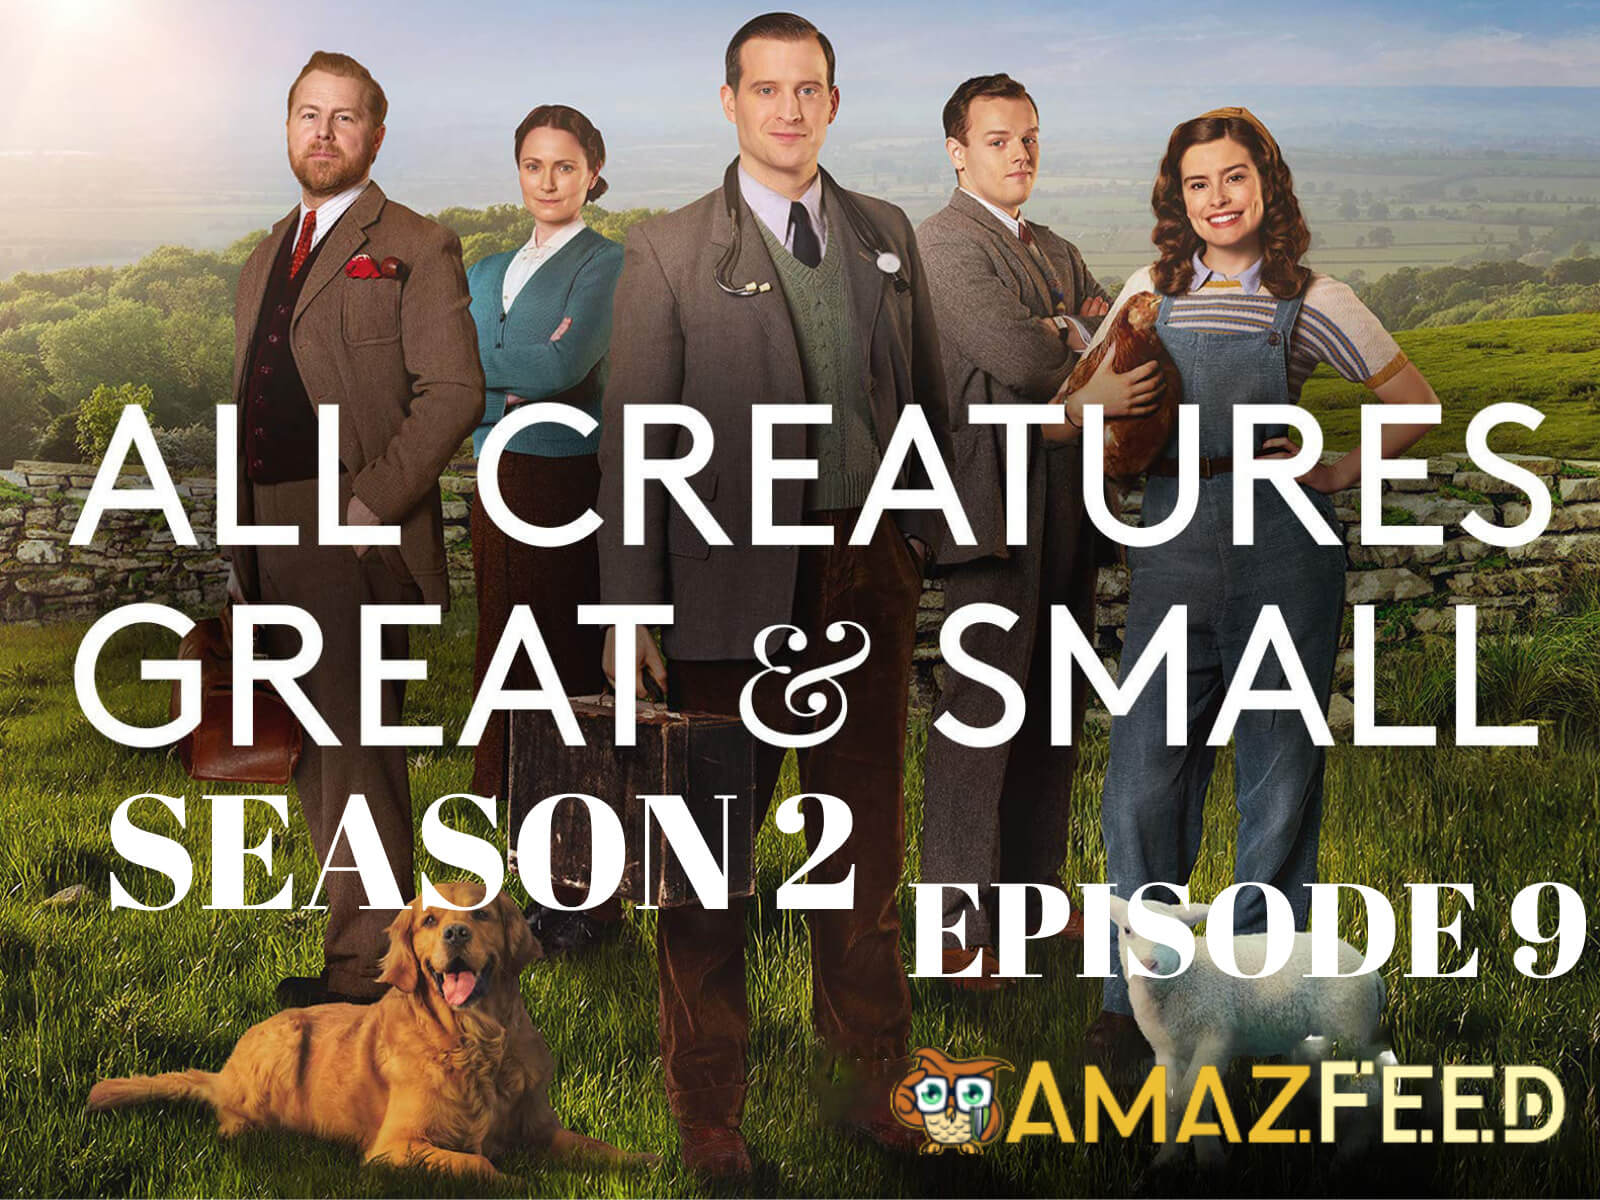 All Creatures Great and Small season 2 episode 9